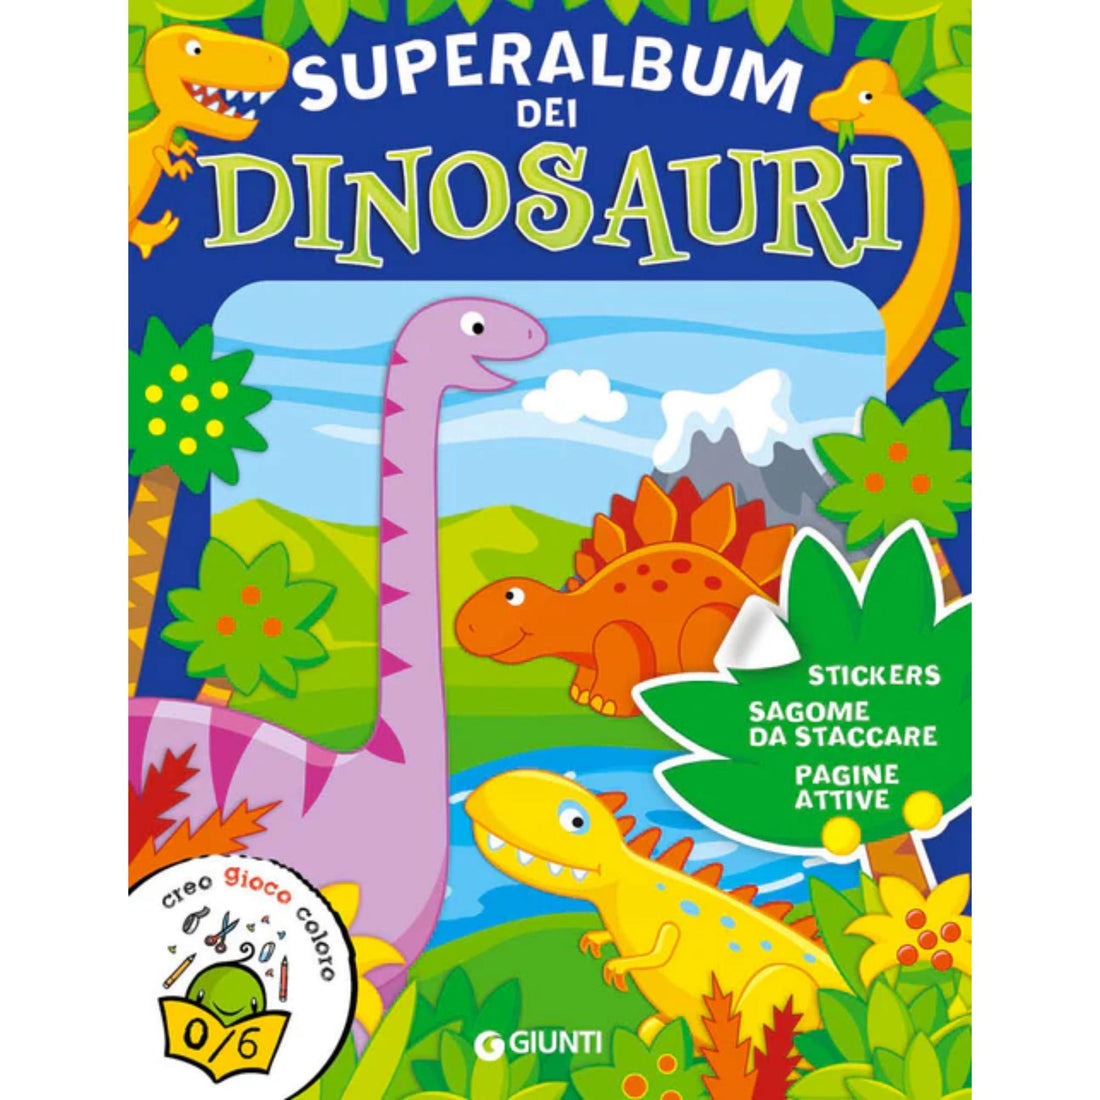 Dinosaurs Superalbum (with stickers and templates)